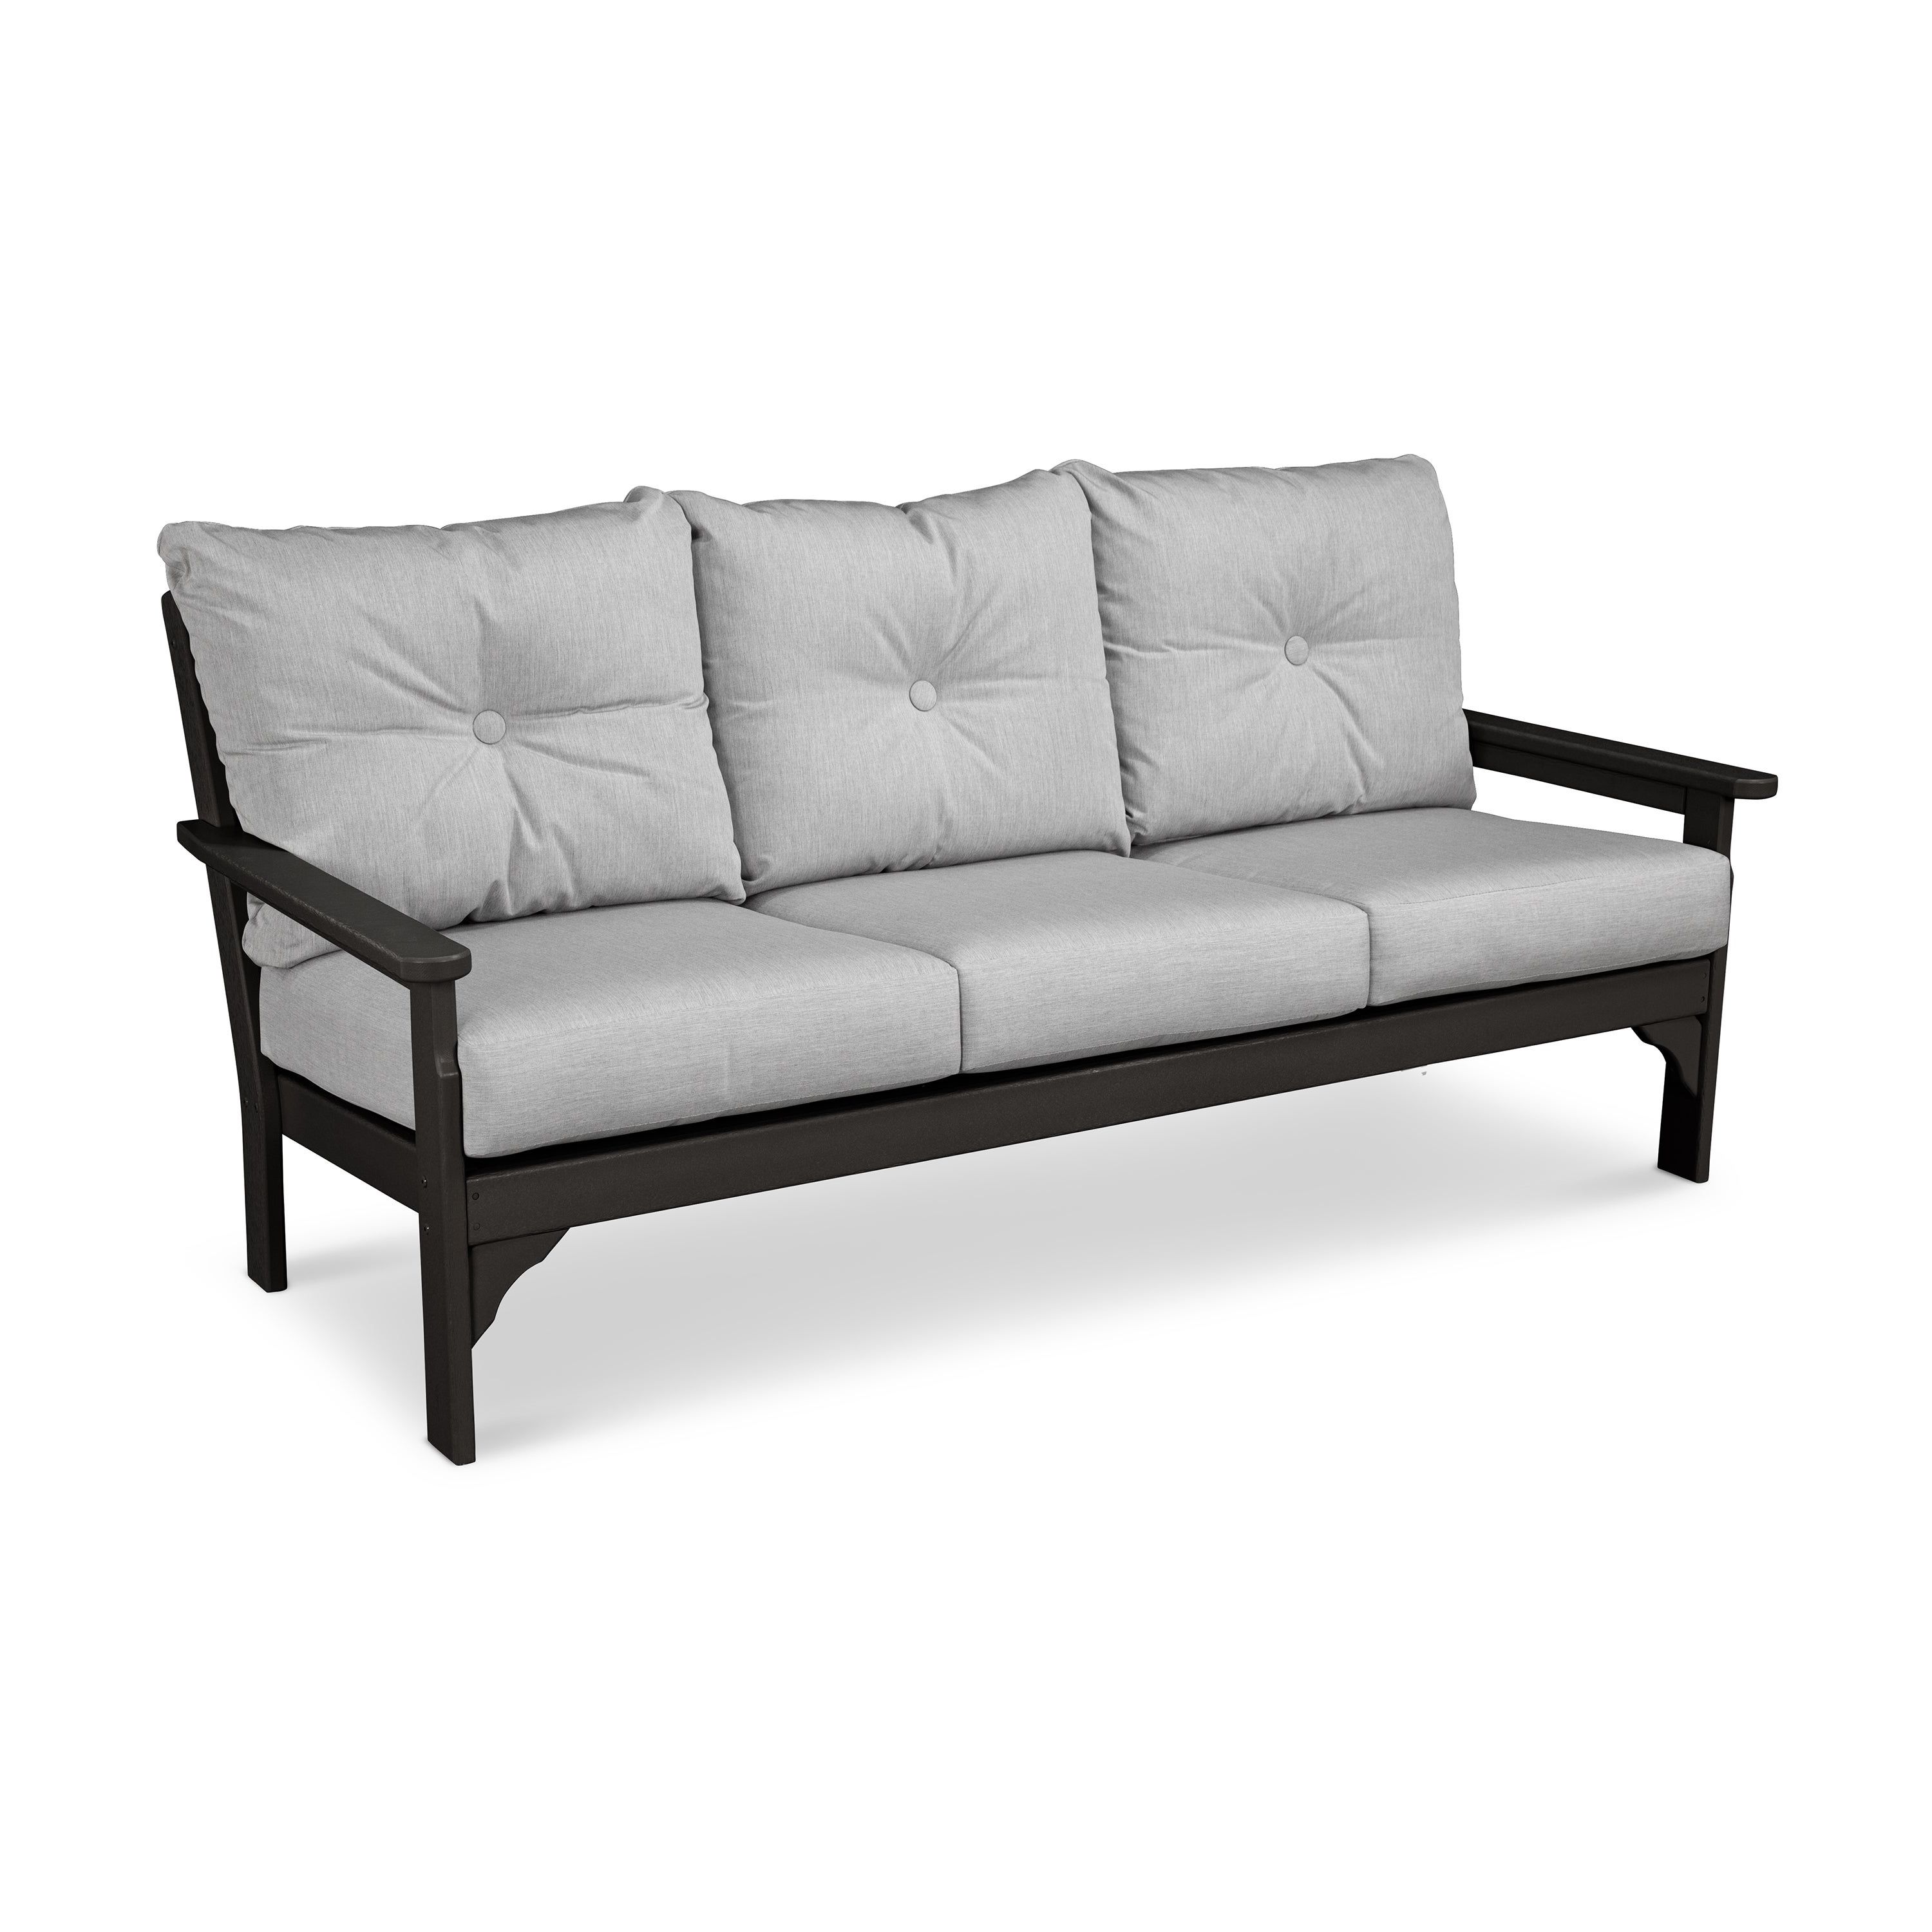 Most Popular Polywood® Vineyard Outdoor Deep Seating Sofa Throughout Vineyard Deep Seating Sofas (View 6 of 20)